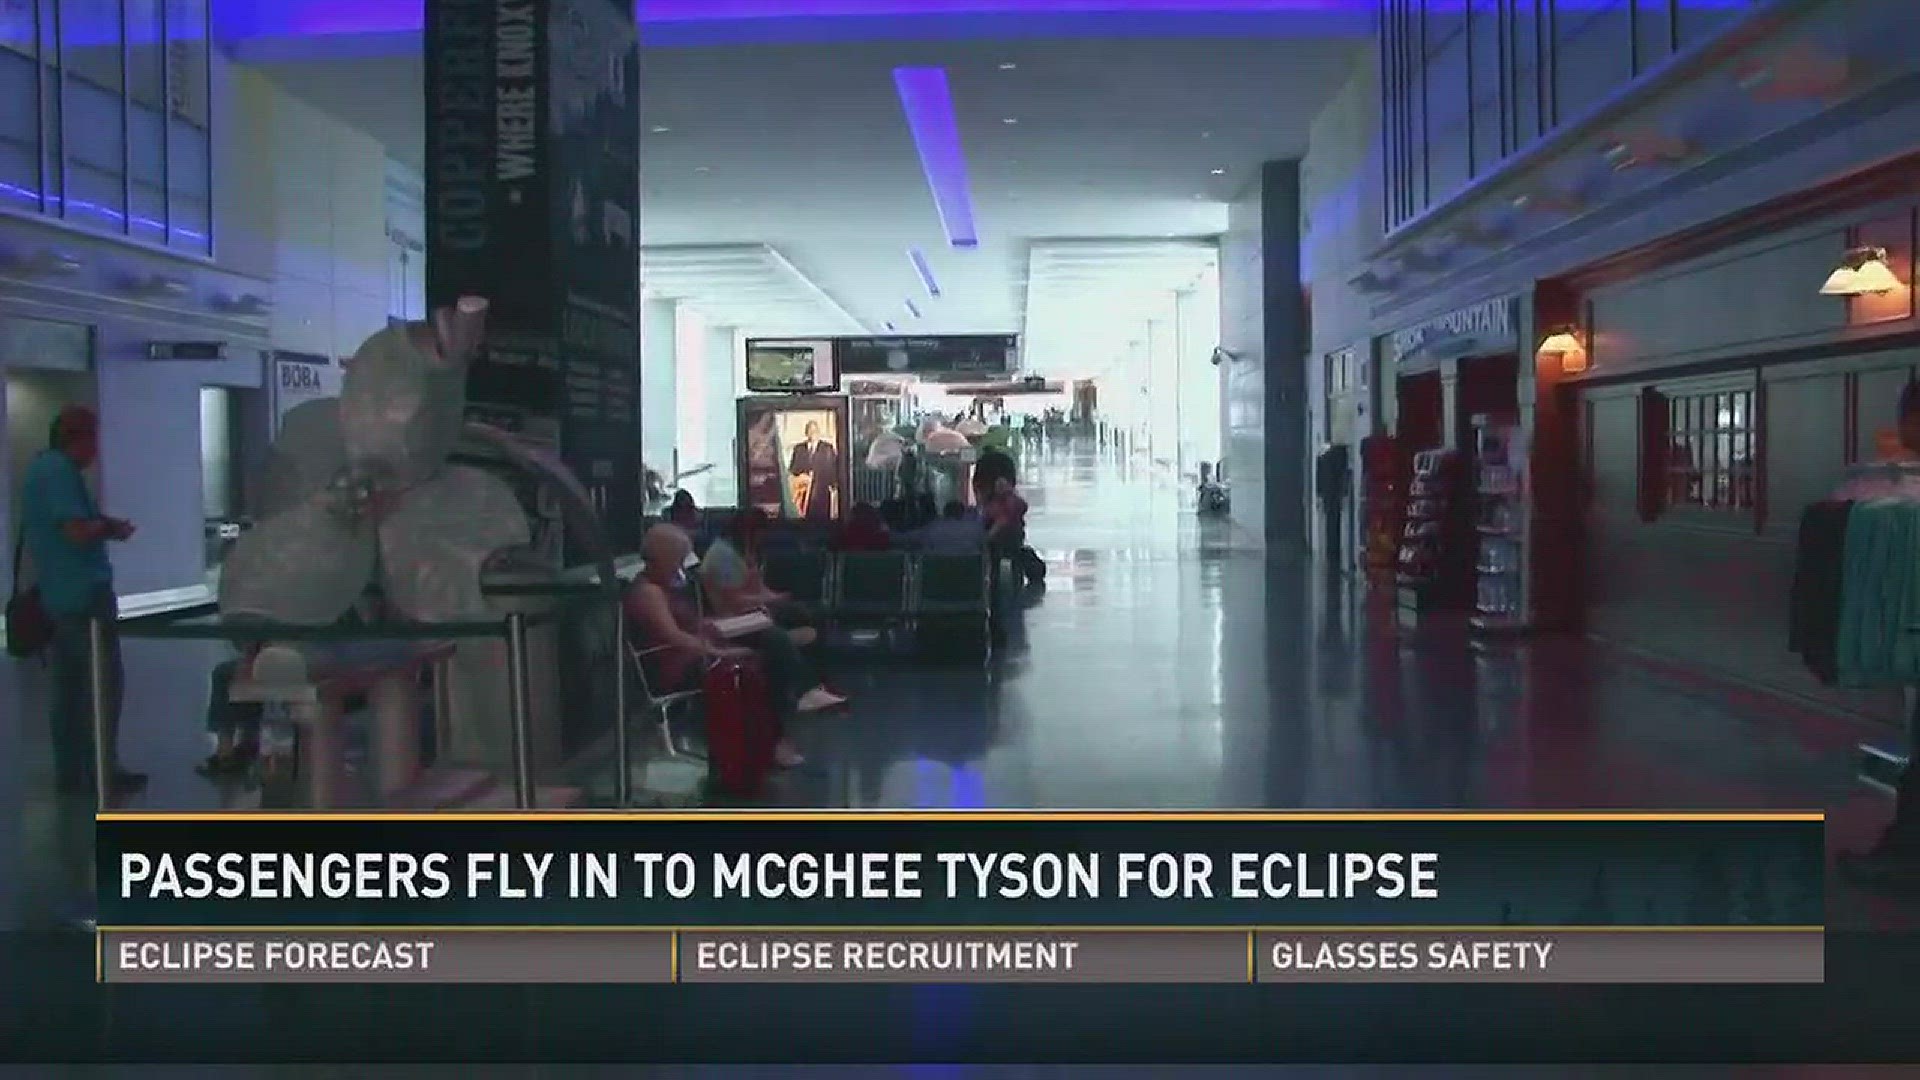 Aug. 18, 2017: The eclipse will bring thousands of visitors to East Tennessee, making for a busy day of arrivals at McGhee Tyson Airport.